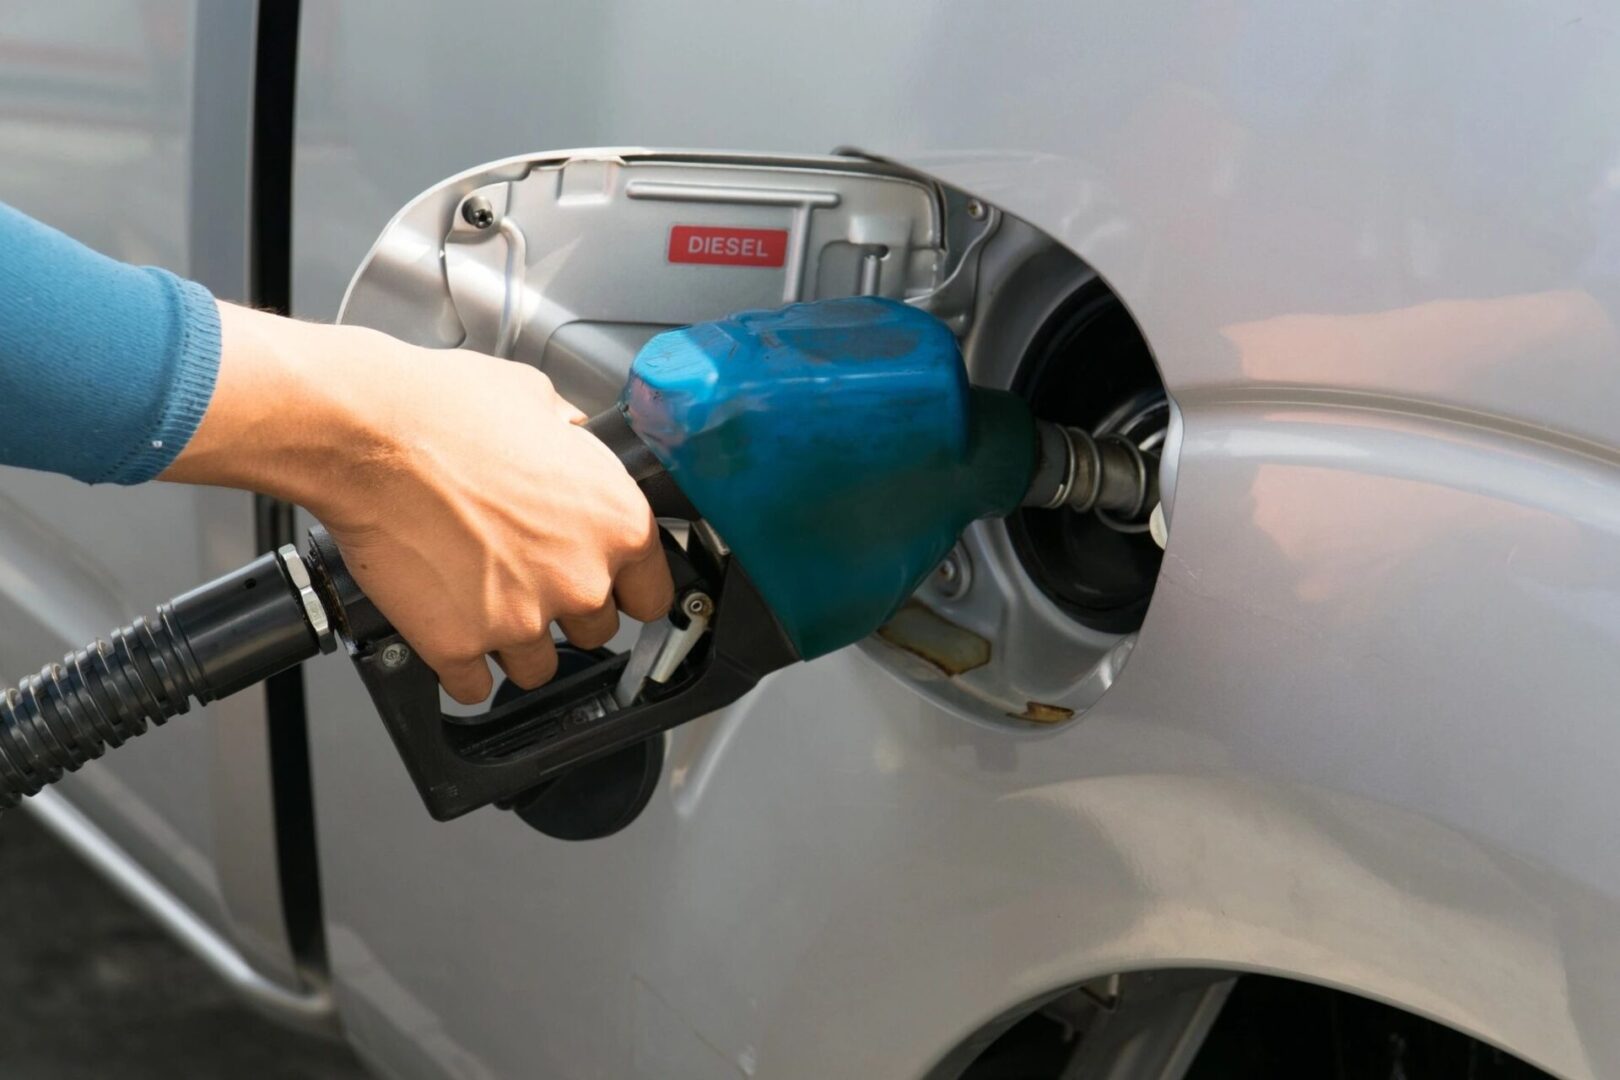 Refueling the car at a gas station fuel pump